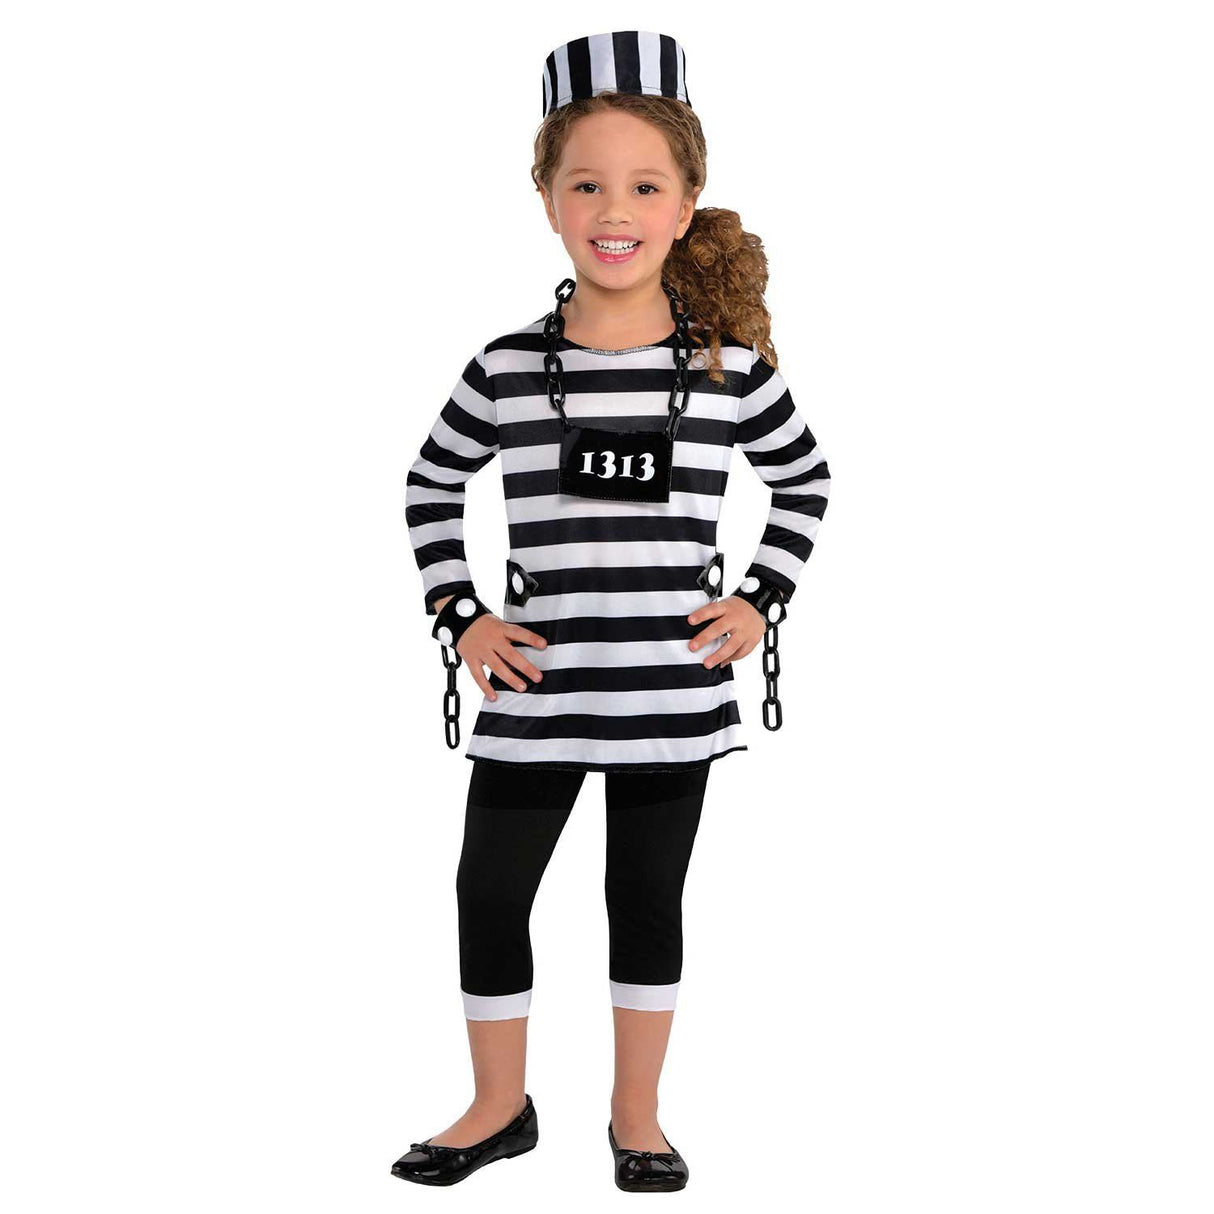 Child Trouble Maker Costume - 14-16 Years